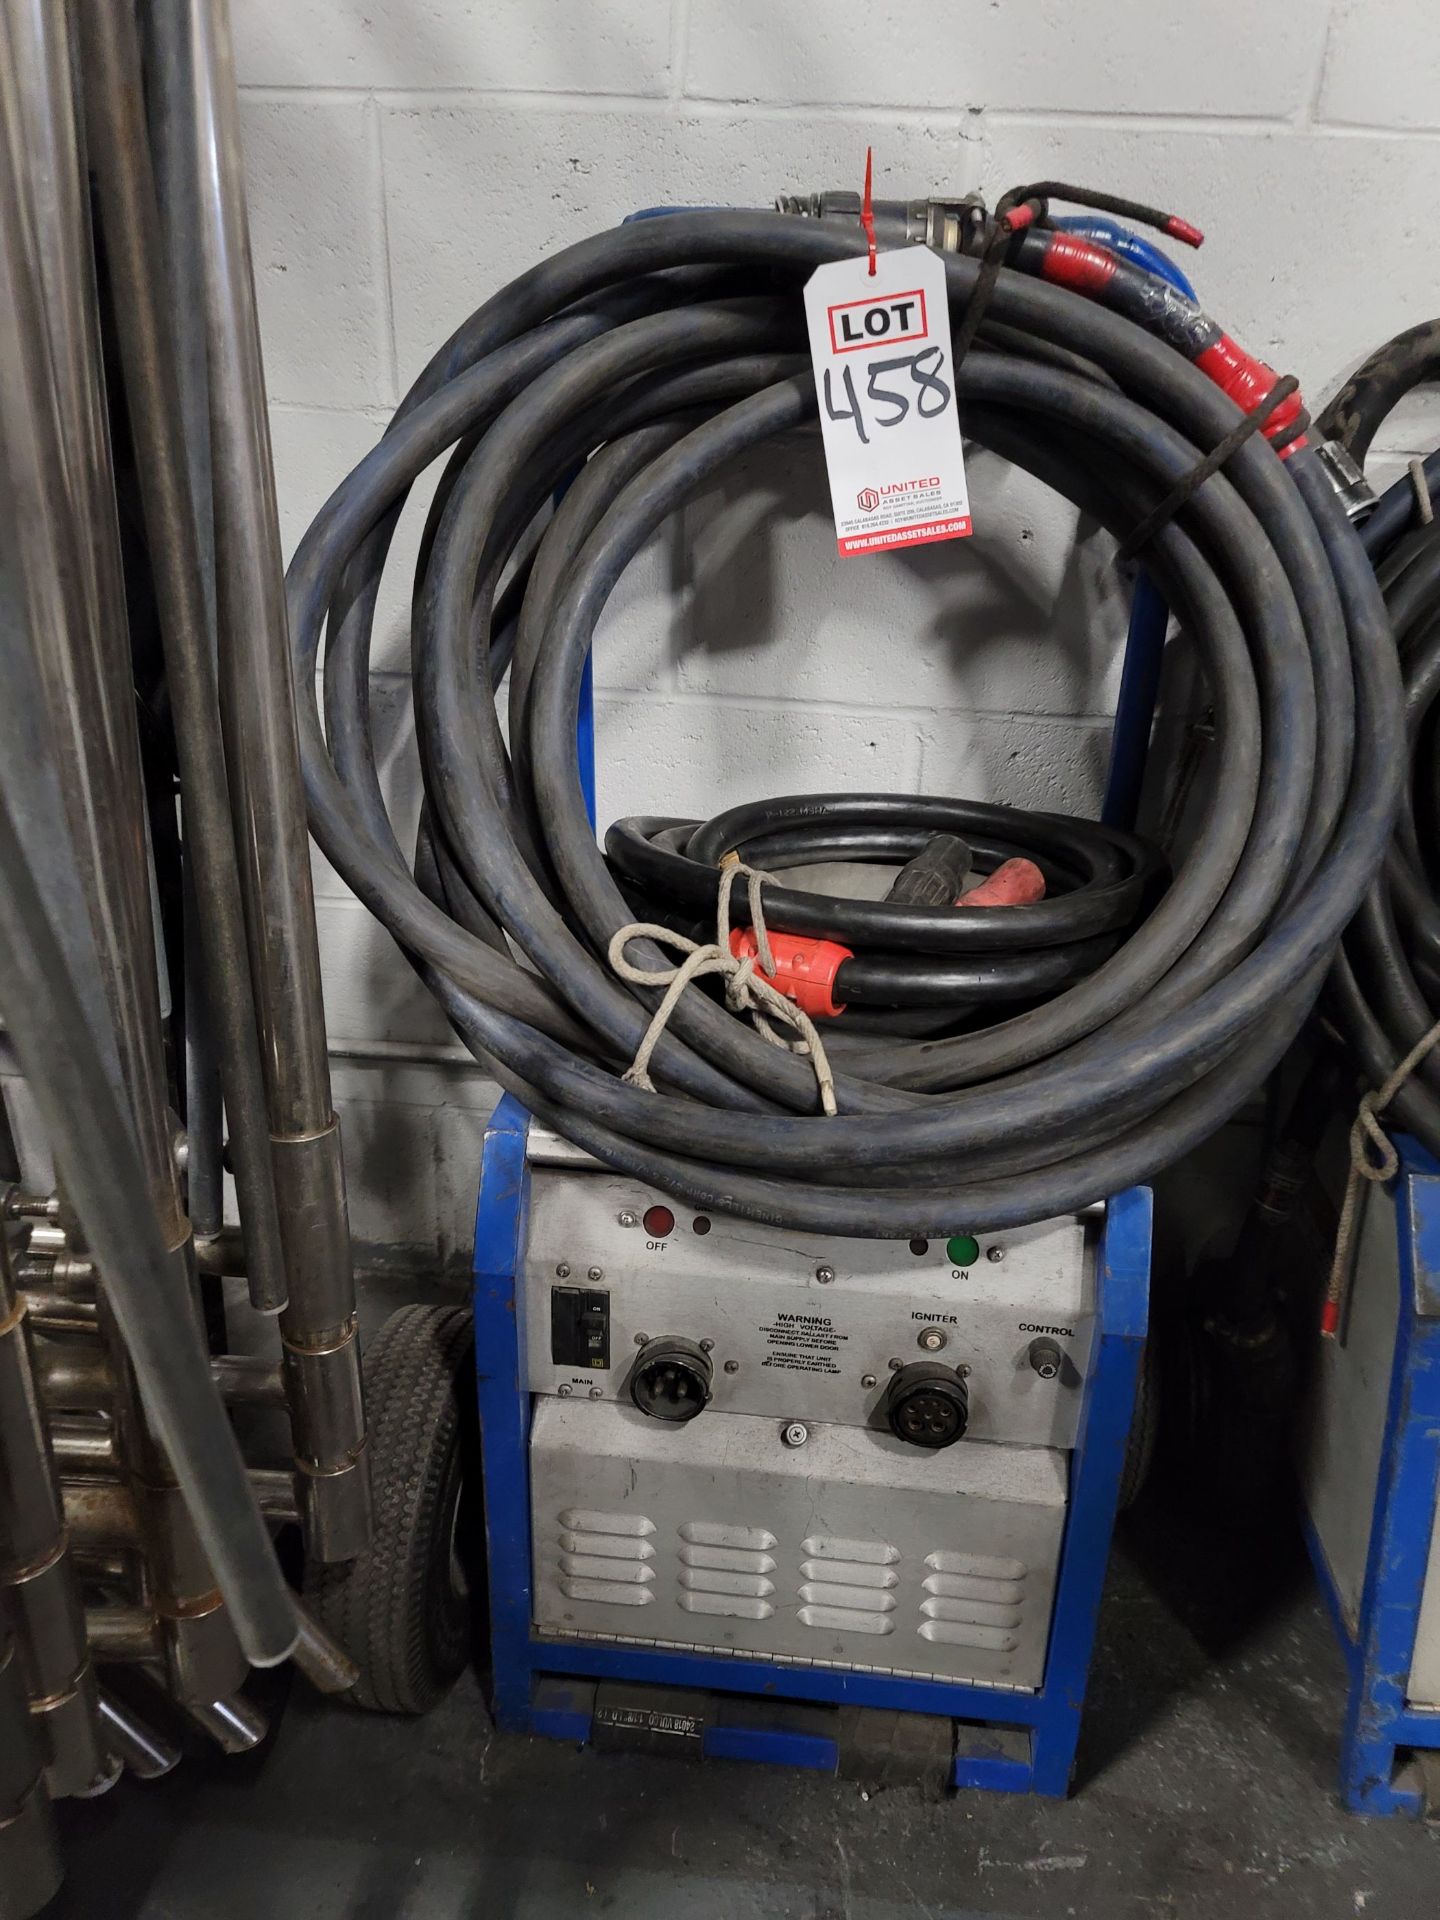 CINEMILLS SQUARE WAVE BALLAST FOR HMI LIGHTING FIXTURES, MODEL MB-12KV, W/ ELECTRIC CABLING